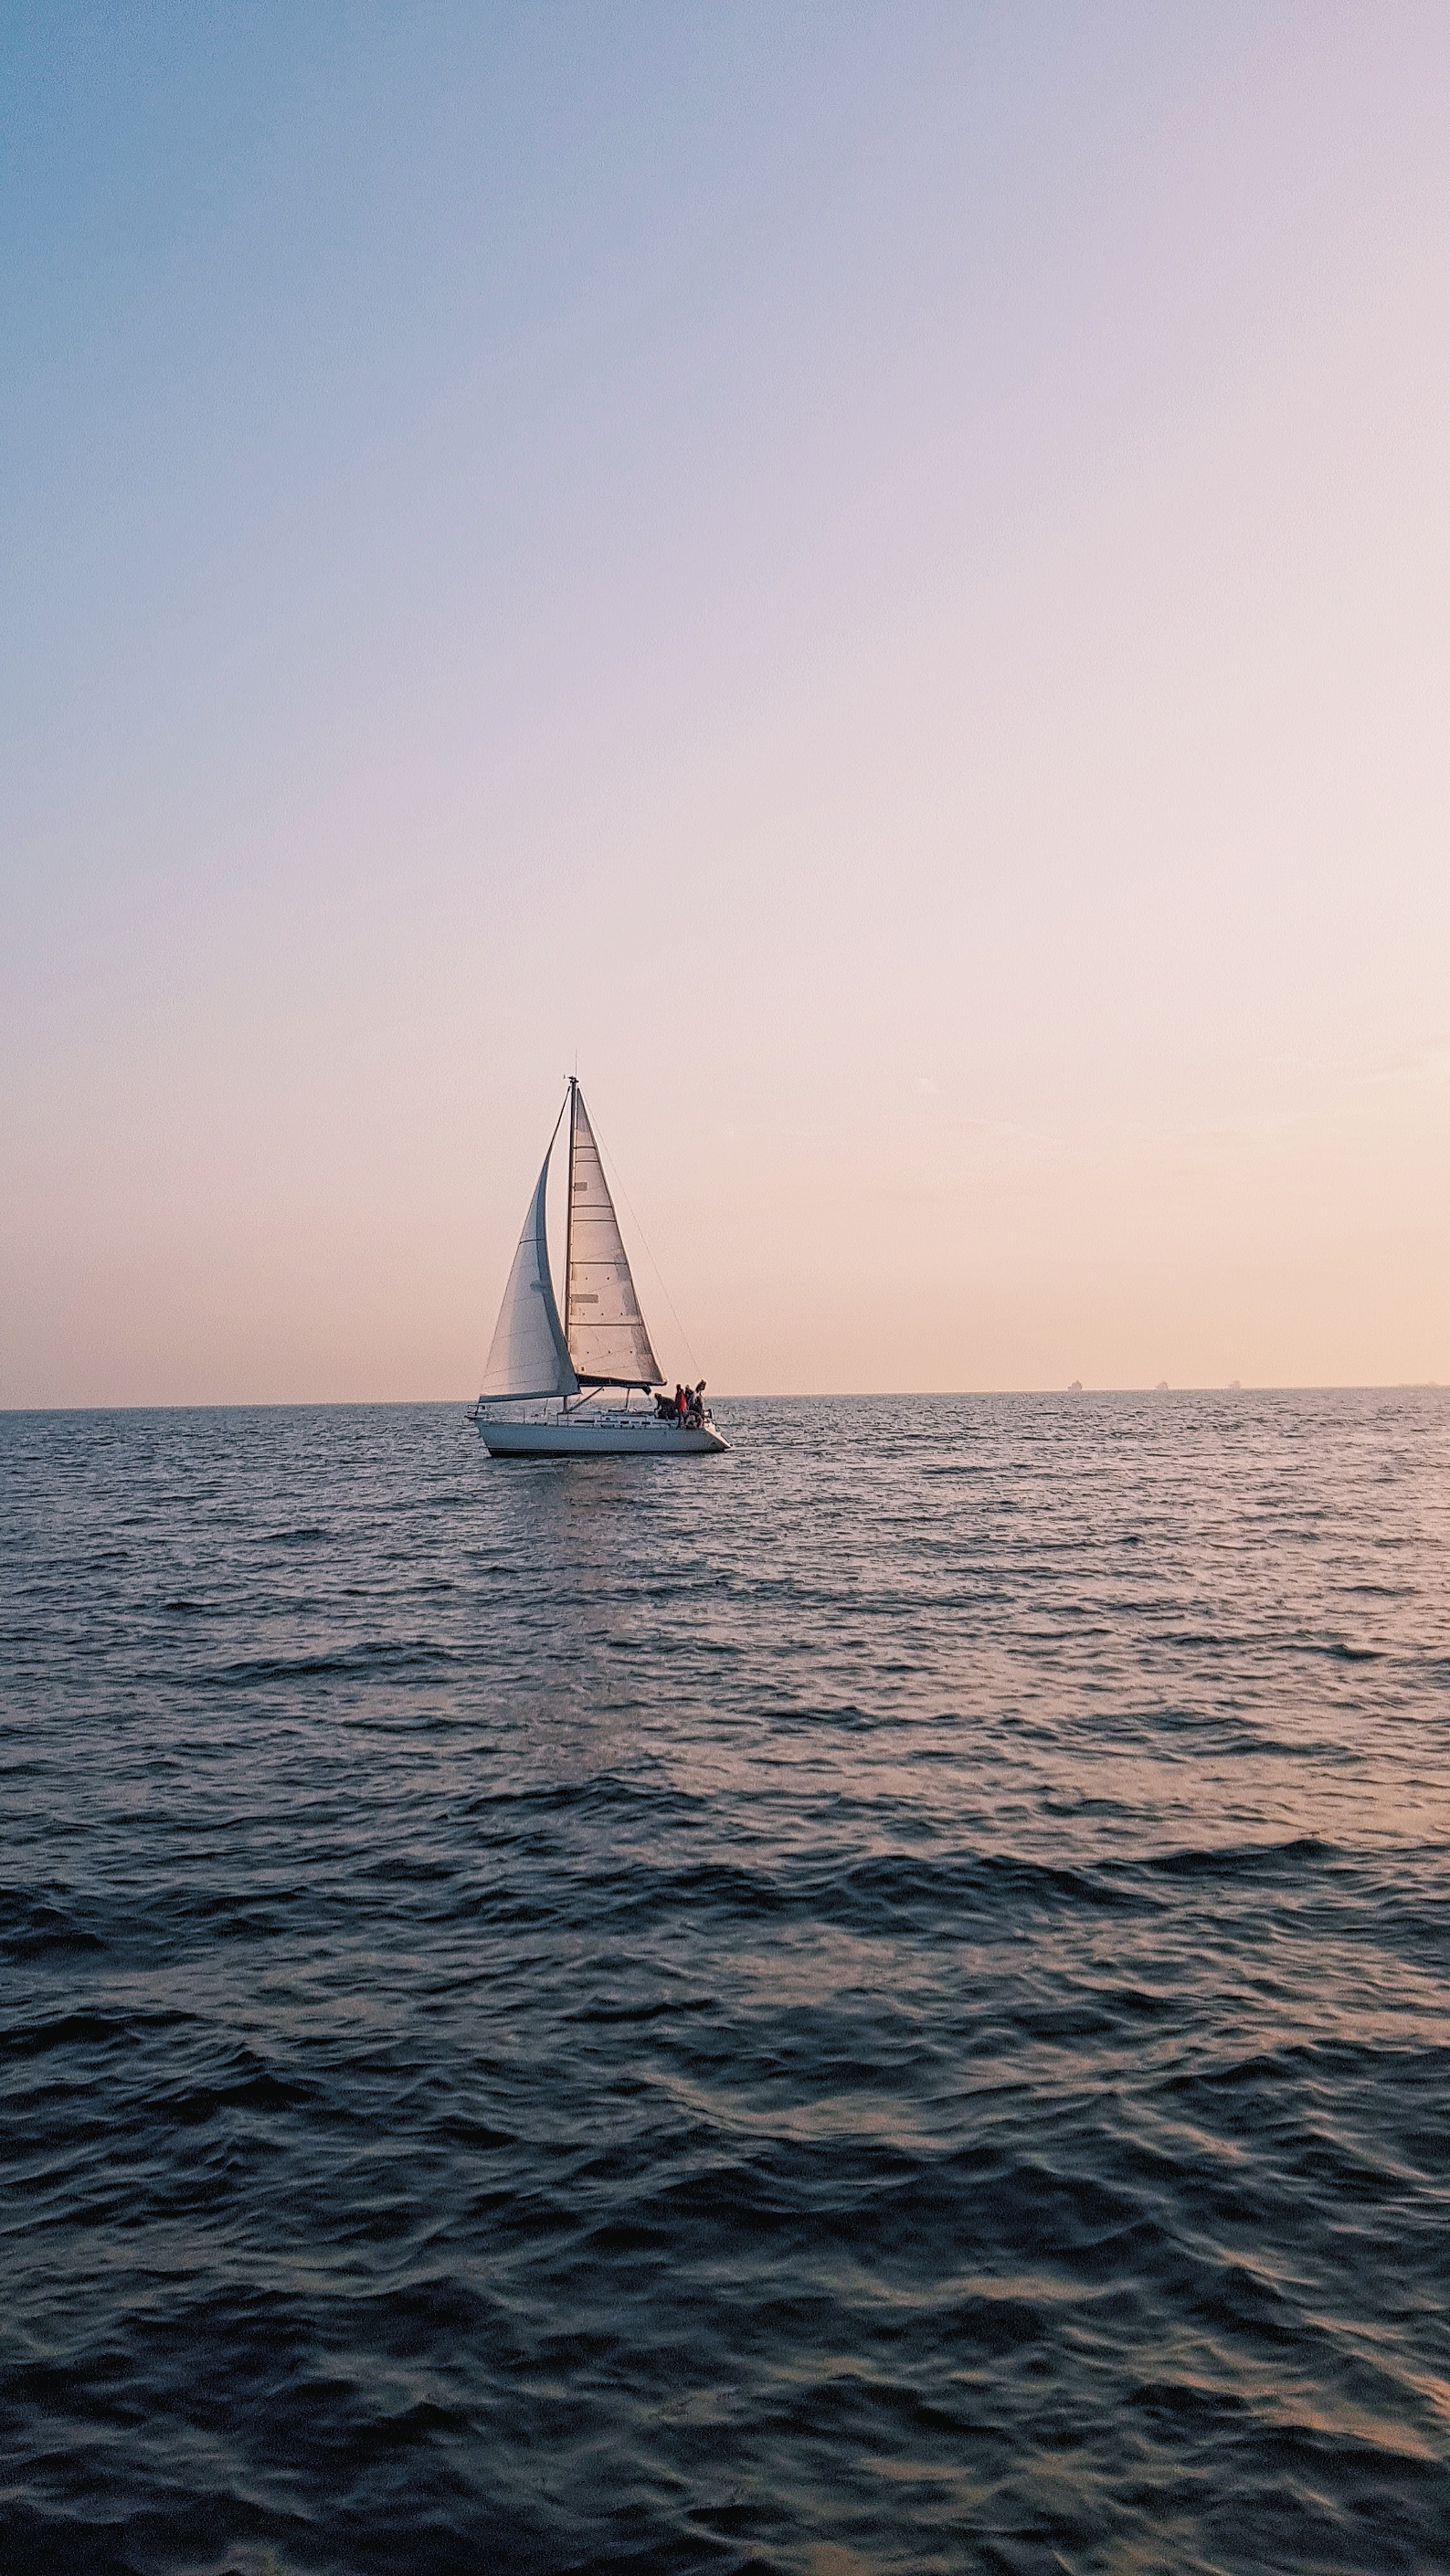 Sunset Cruise on a Sailing Boat in Barcelona